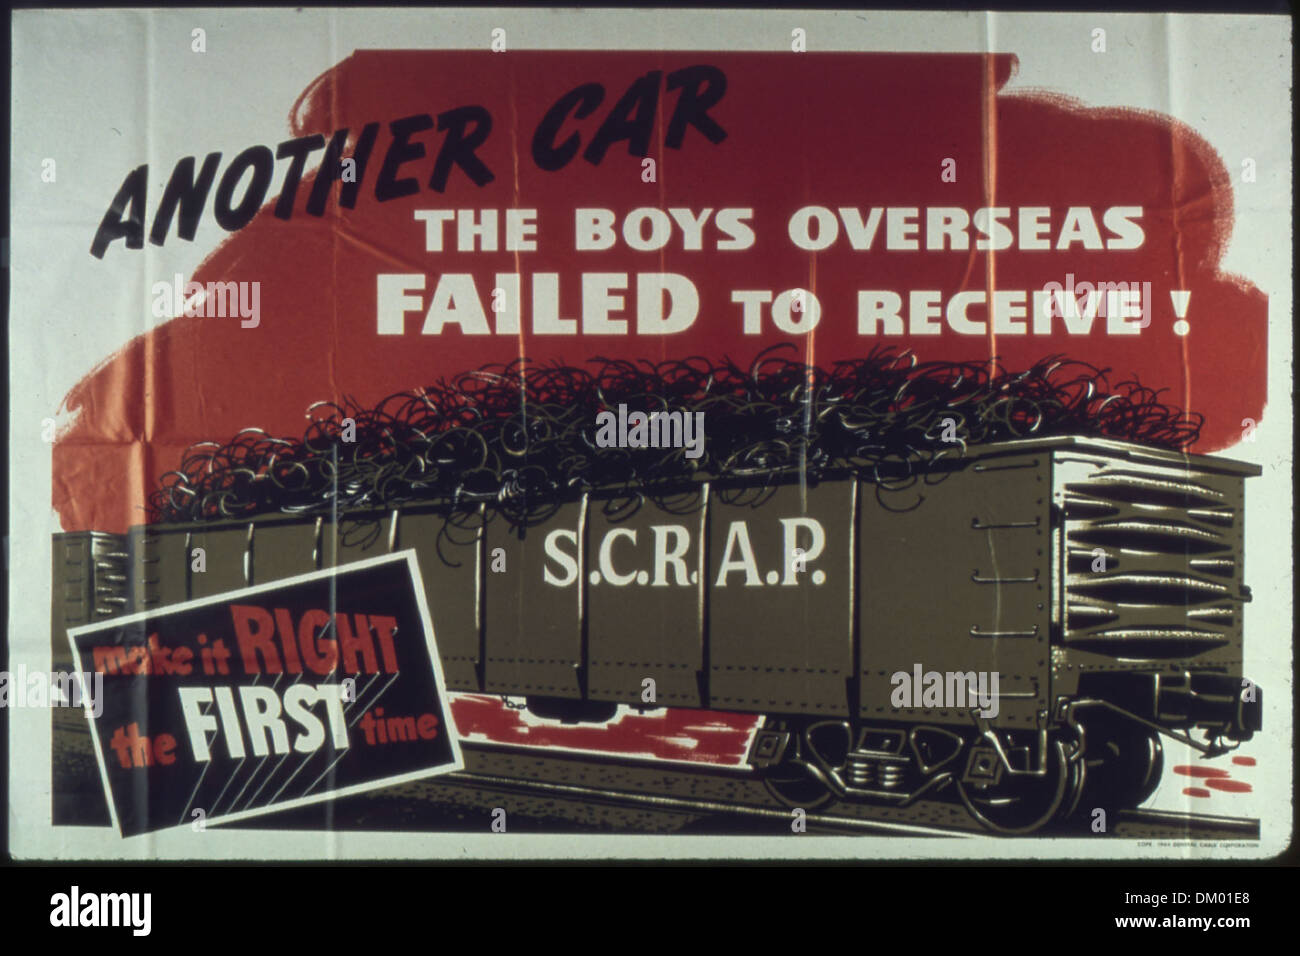 'Another car the boys overseas failed to receive' 513856 Stock Photo